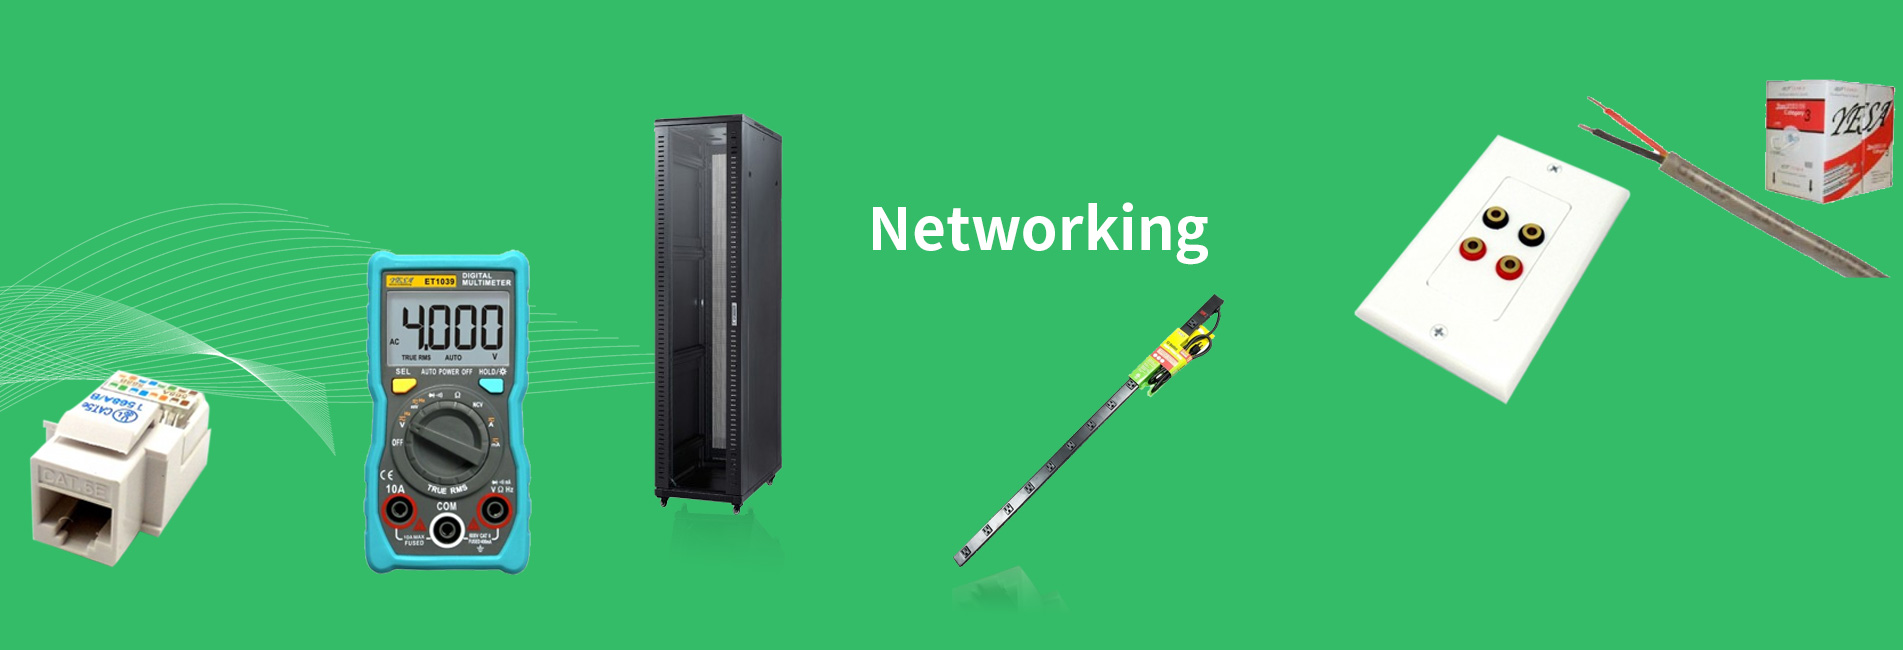 Networking banner_2